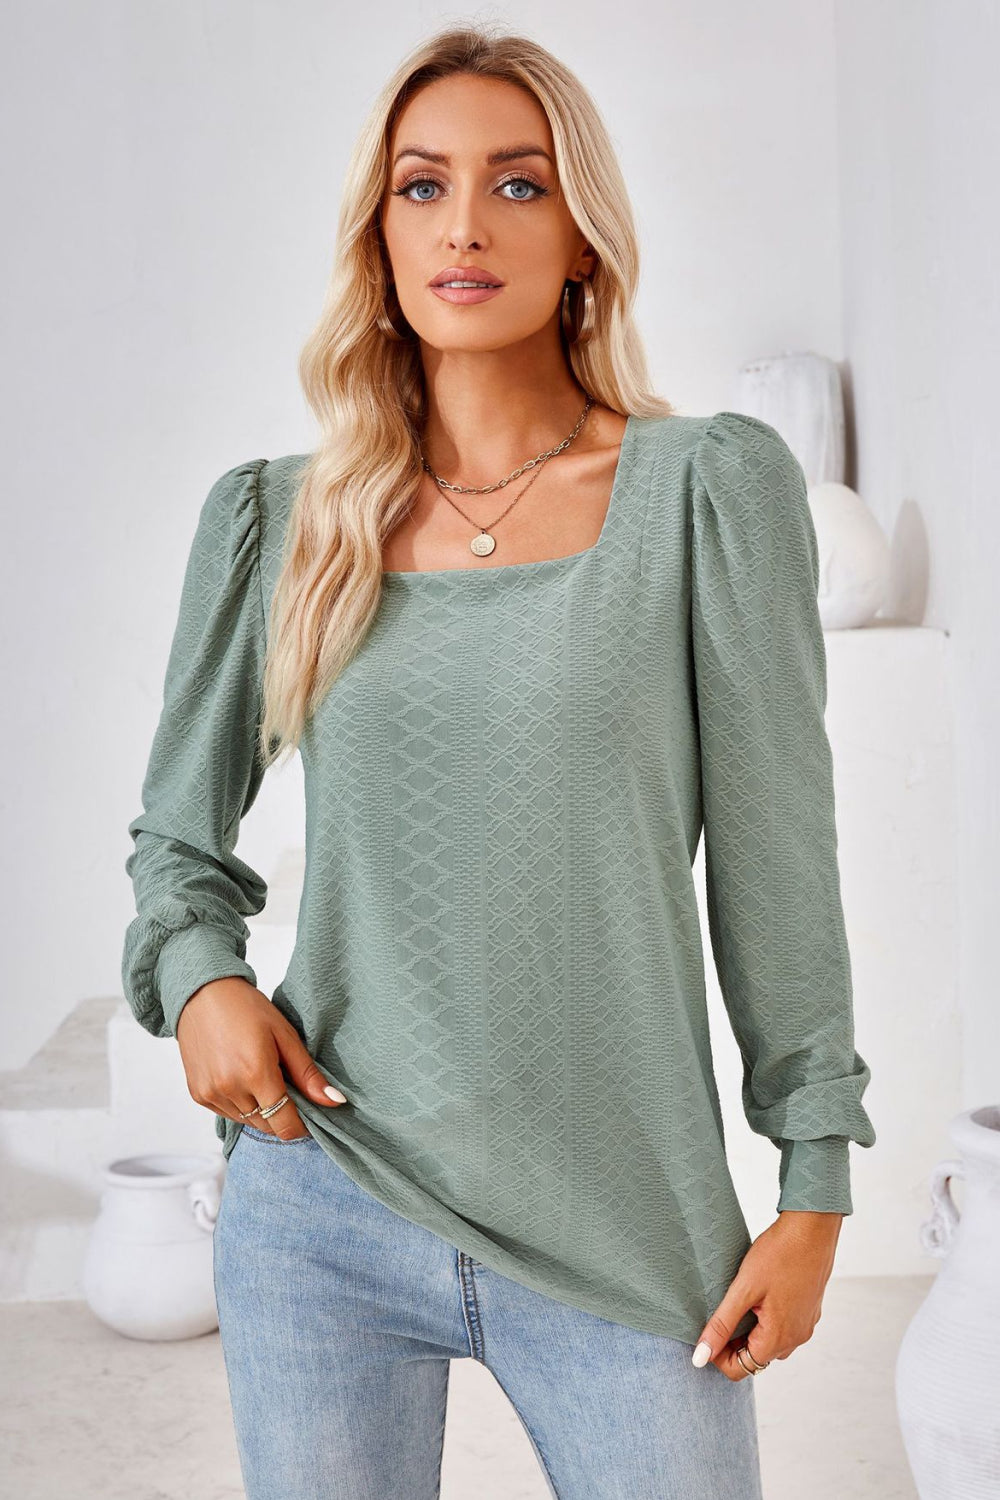 Square Neck Puff Sleeve Blouse - Women’s Clothing & Accessories - Shirts & Tops - 26 - 2024